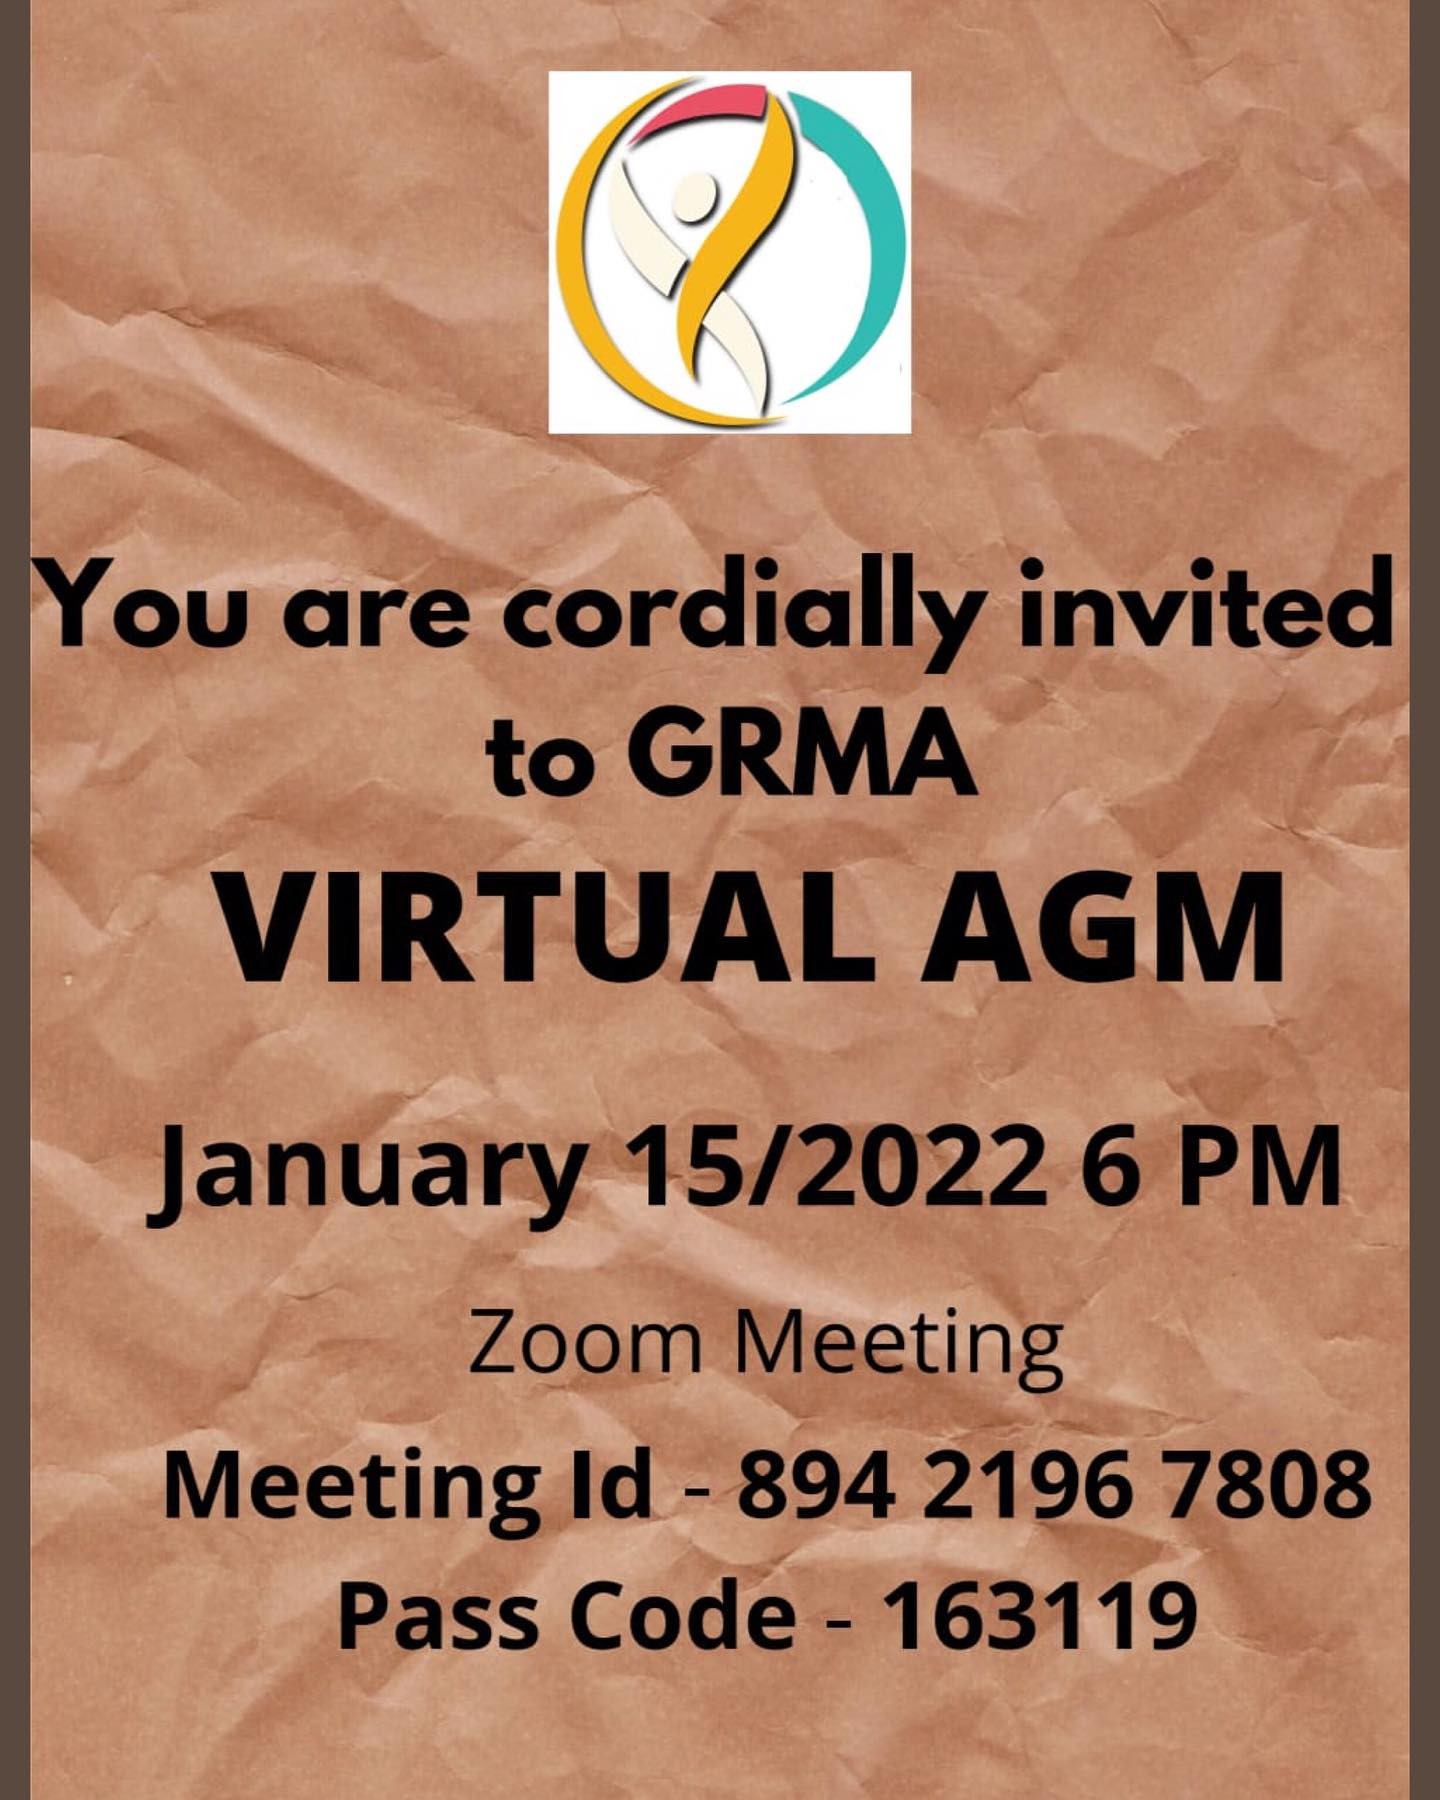 Annual General Body (AGM) meeting on January 15 2022, 6PM